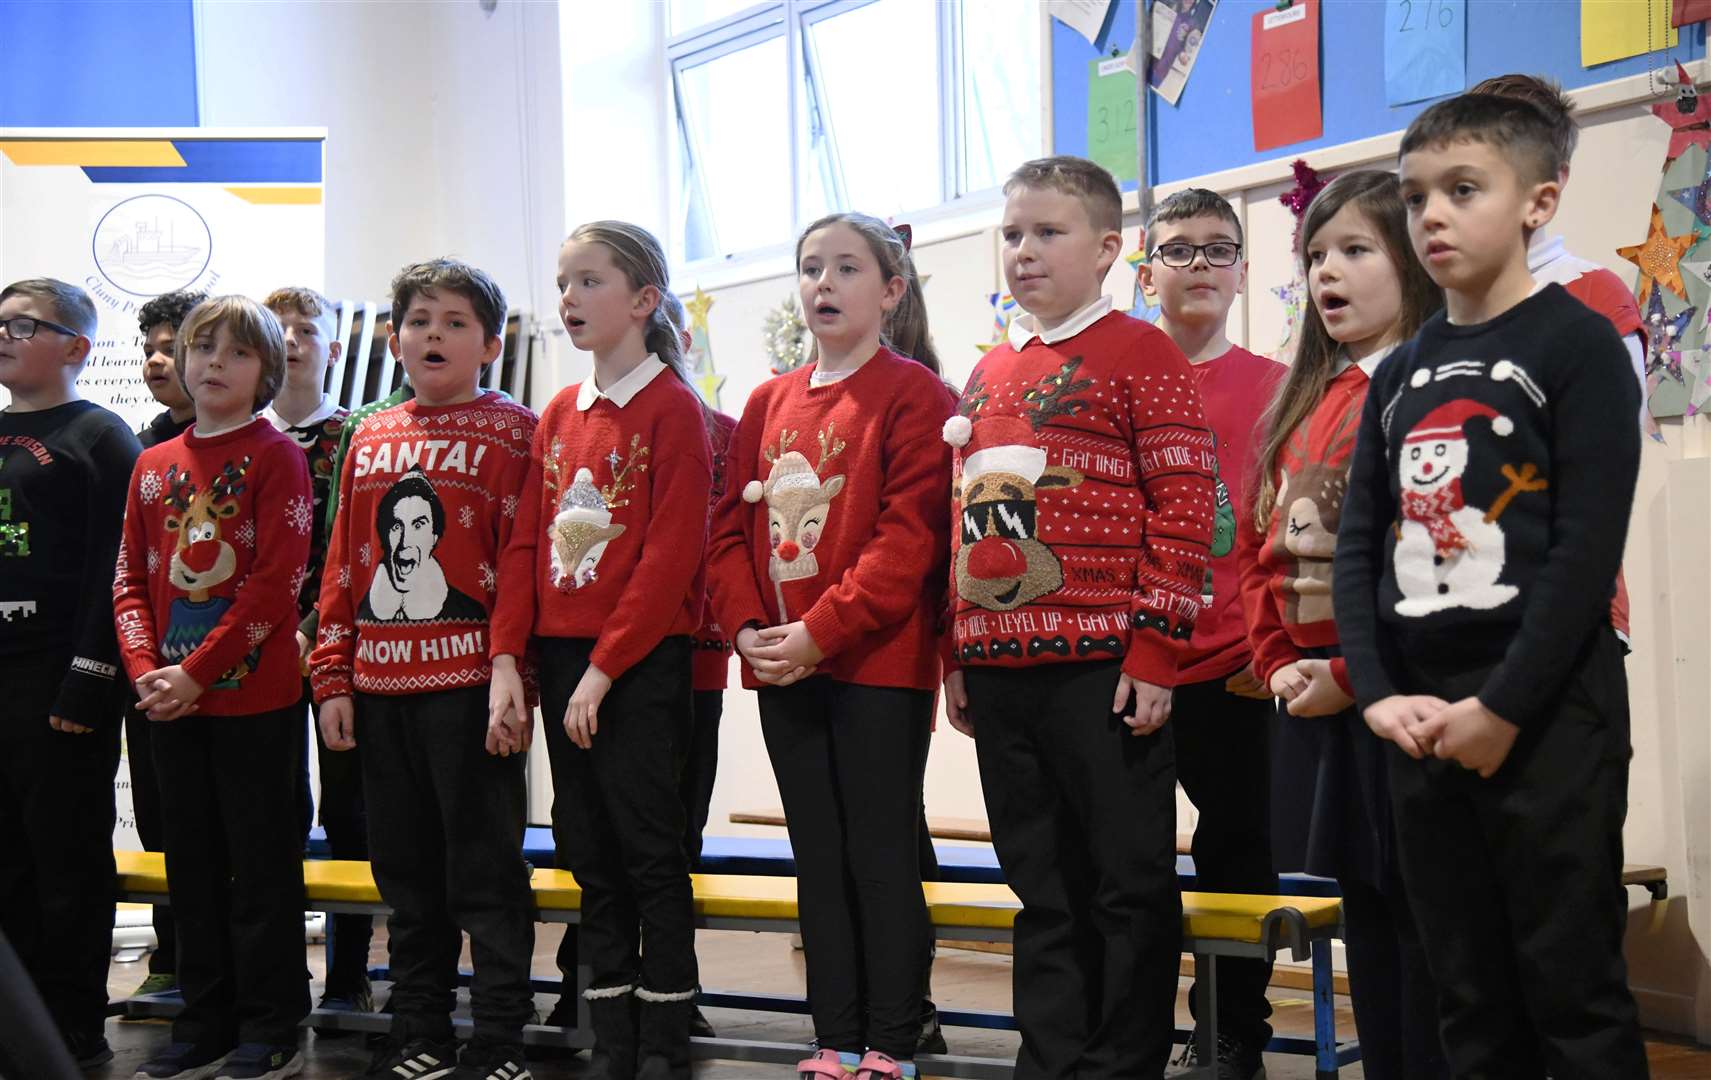 There were plenty Christmas jumpers to be found at the concert! Picture: Beth Taylor